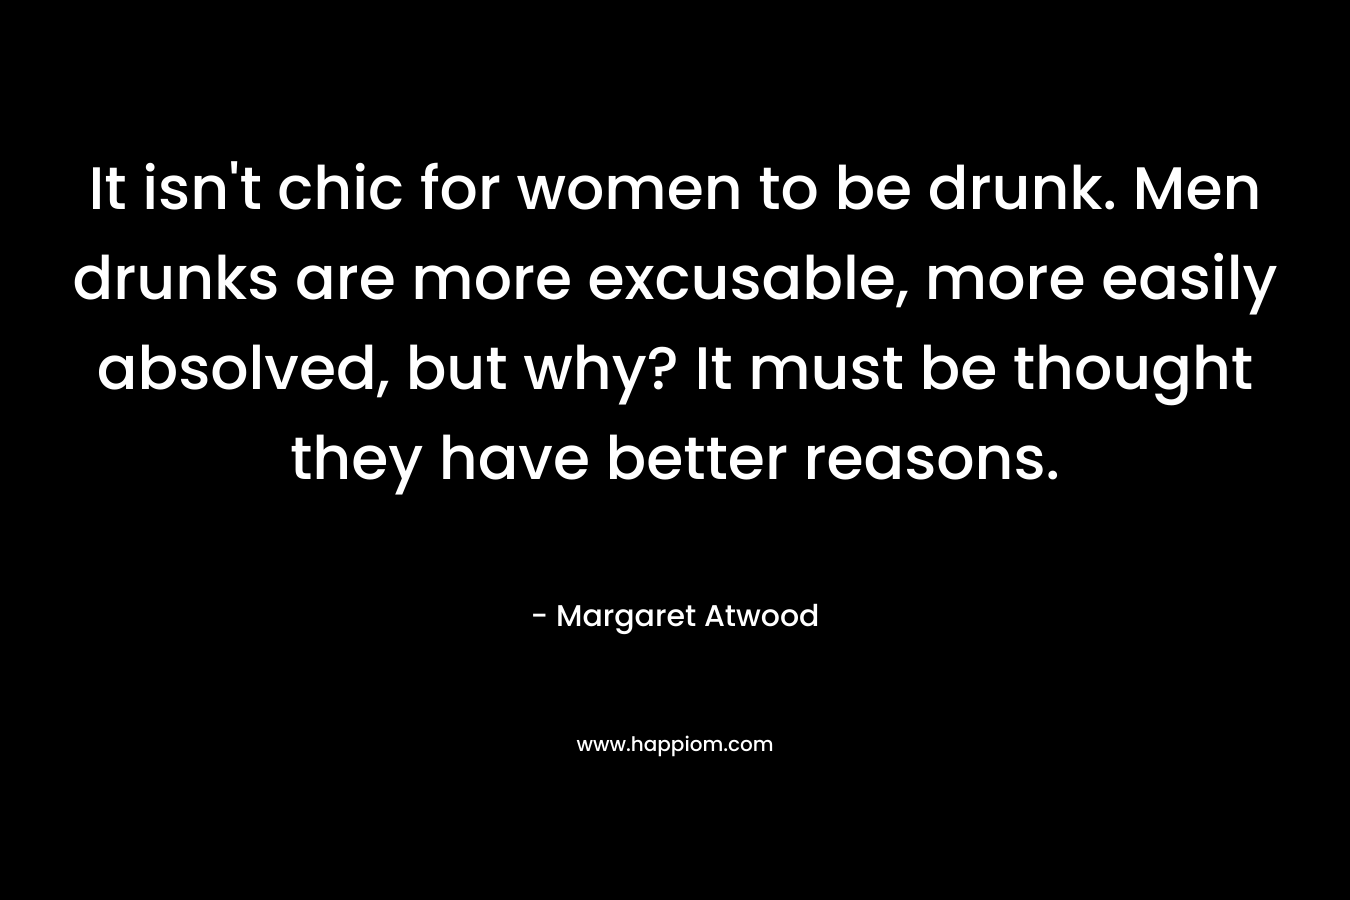 It isn’t chic for women to be drunk. Men drunks are more excusable, more easily absolved, but why? It must be thought they have better reasons. – Margaret Atwood